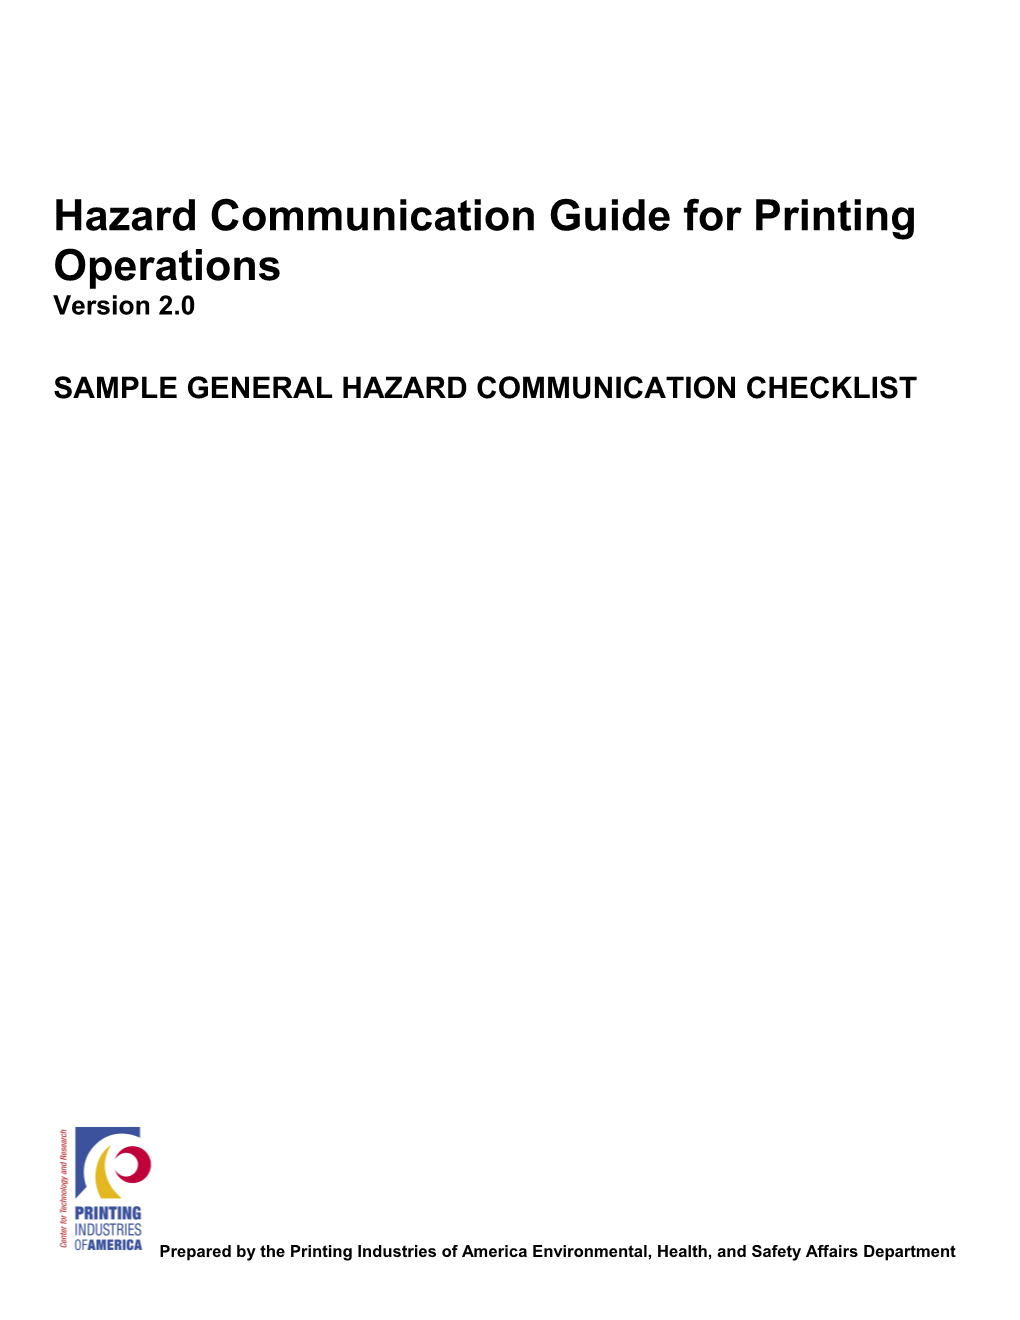 Hazard Communication Guide for Printing Operations